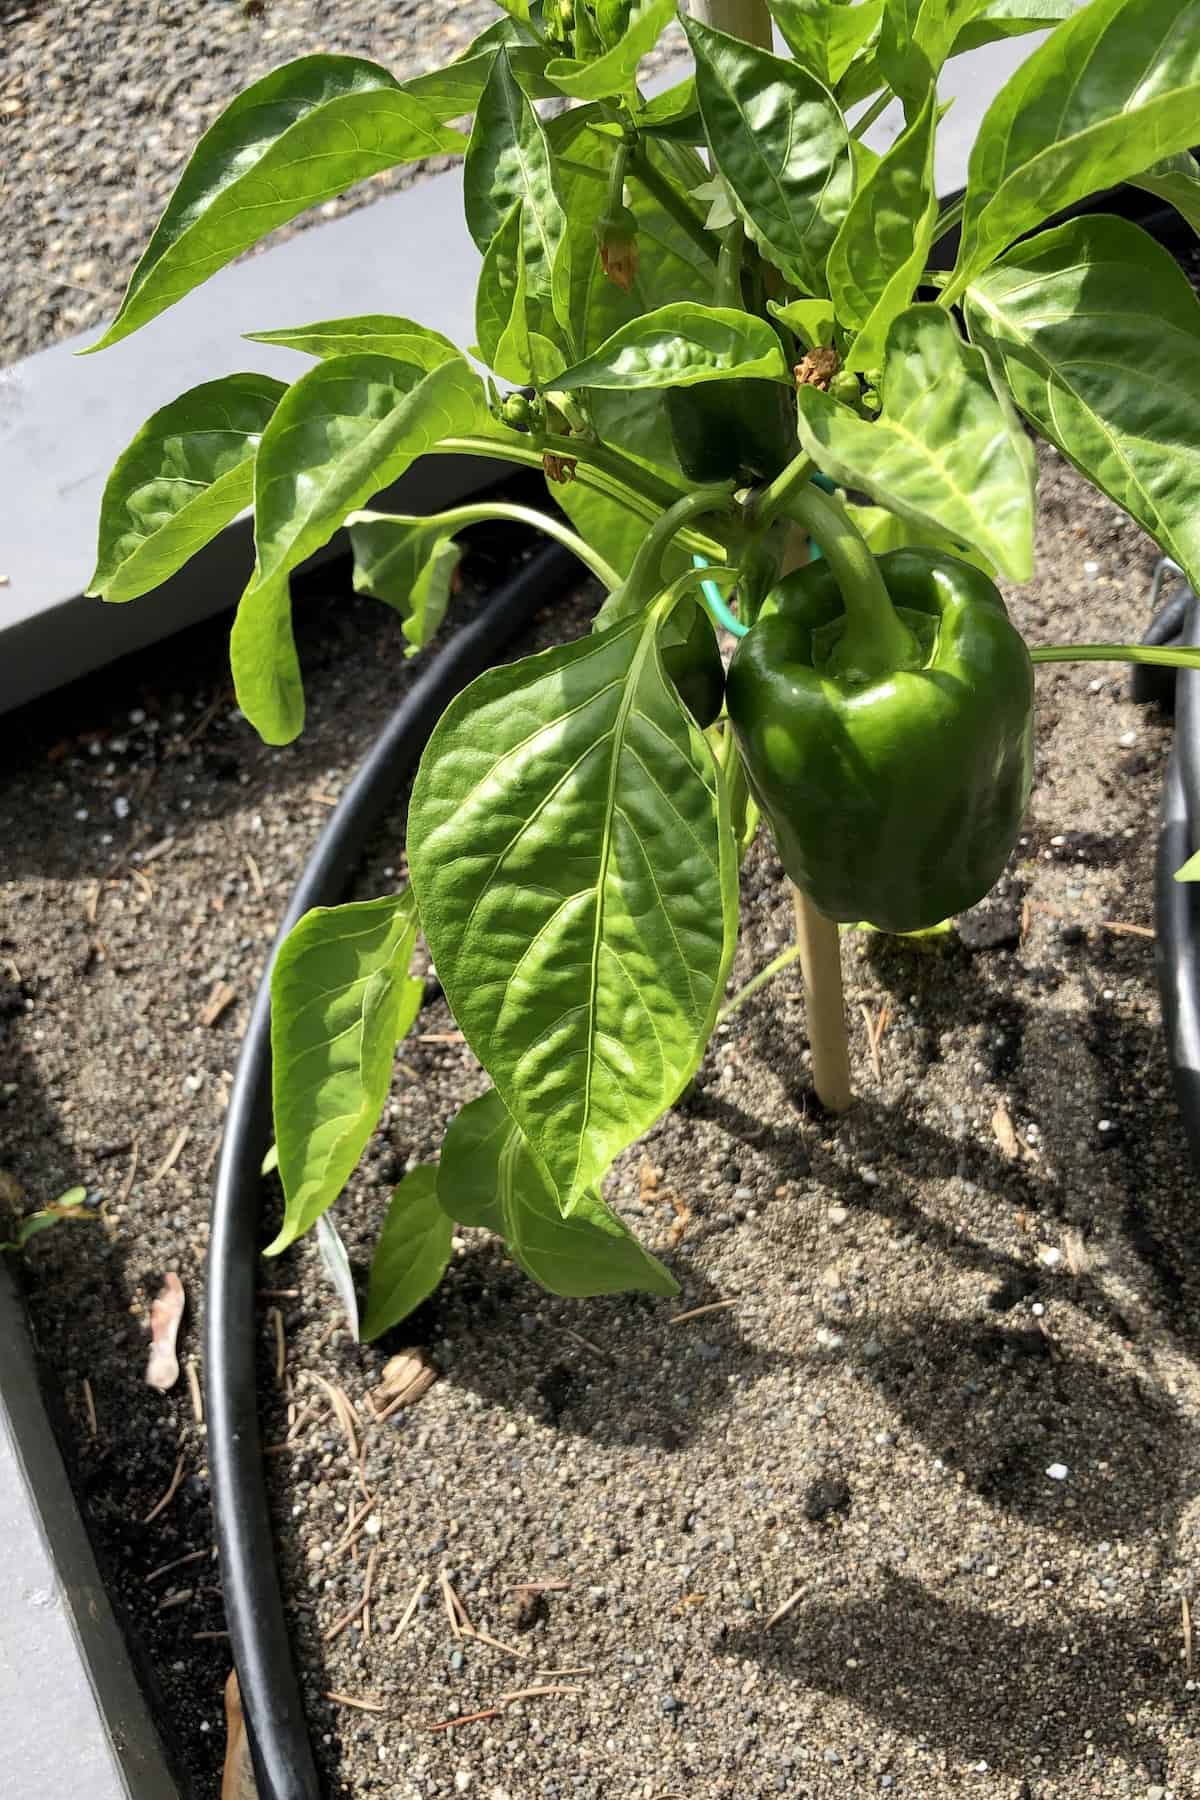 Green pepper growing on plant in raised bed